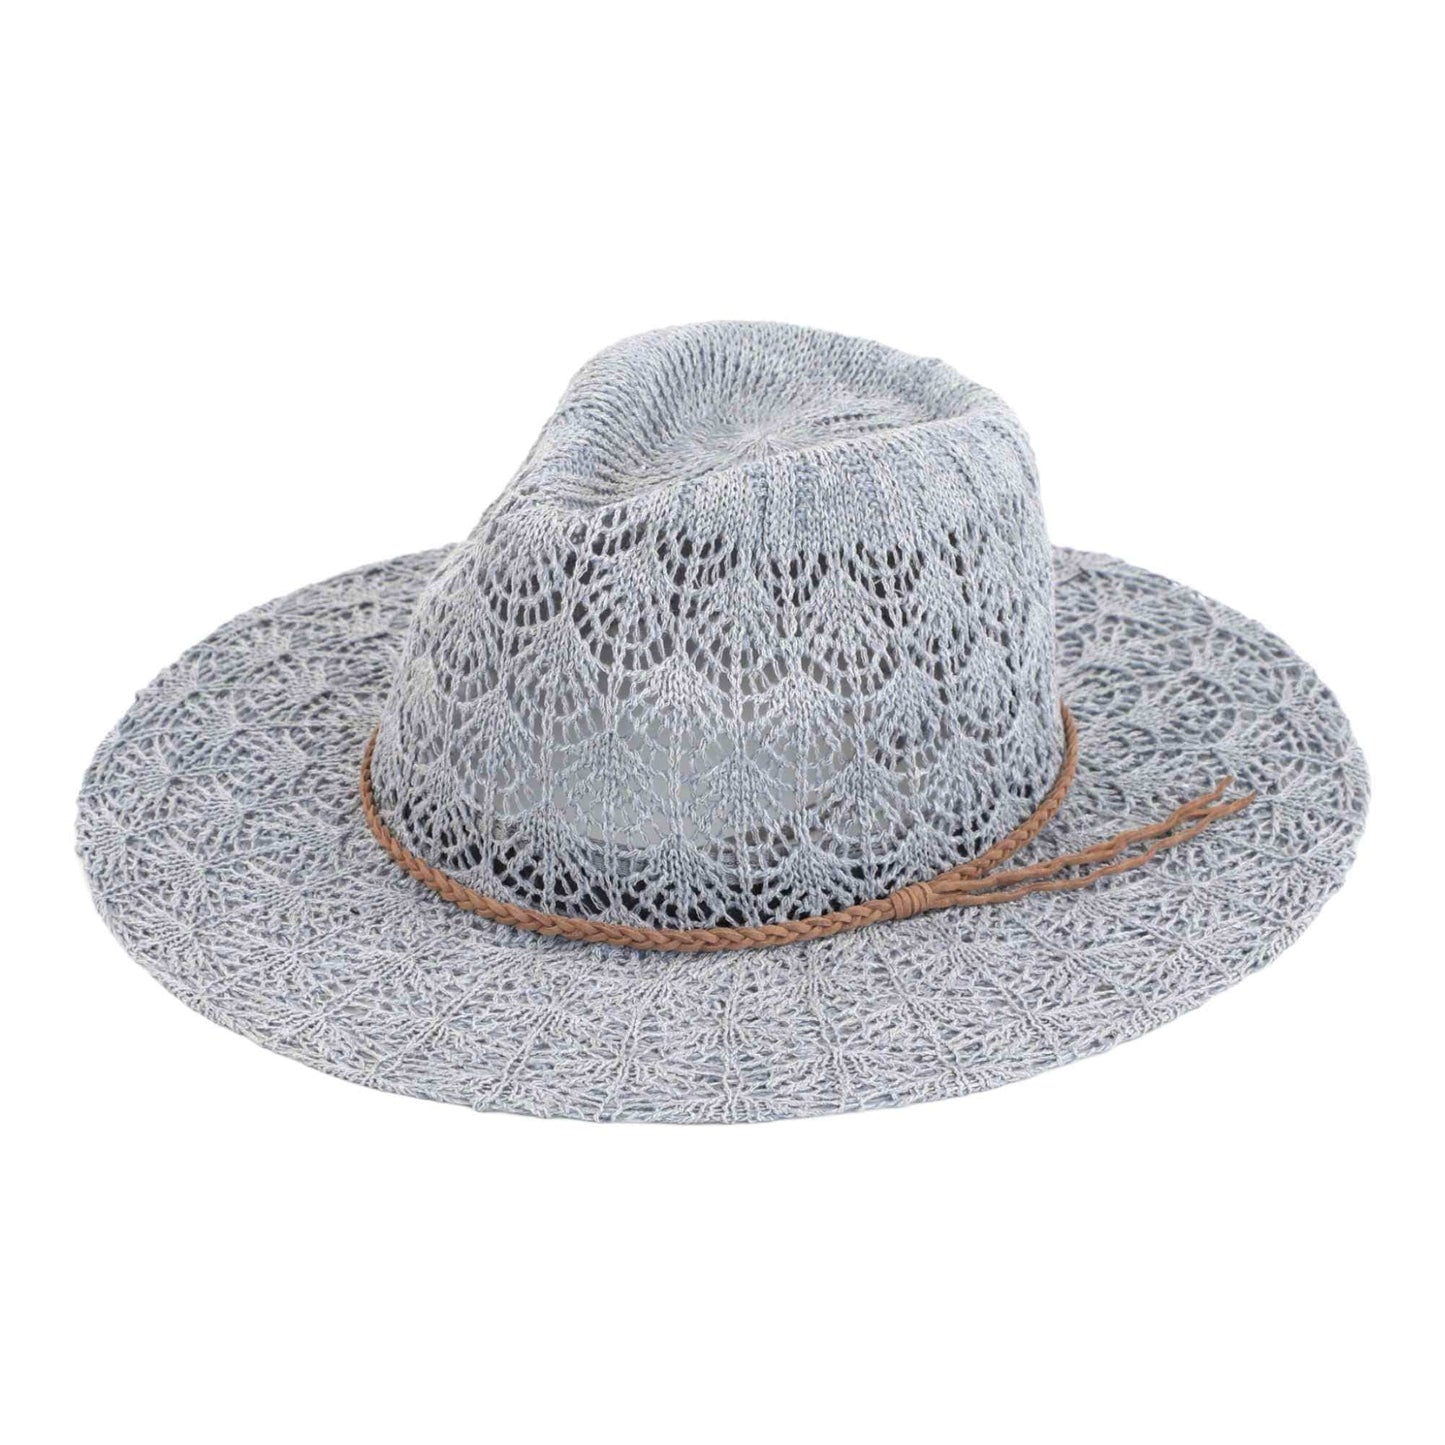 KP013 Horseshoe Lace With Braided Suede Trim Panama Hat